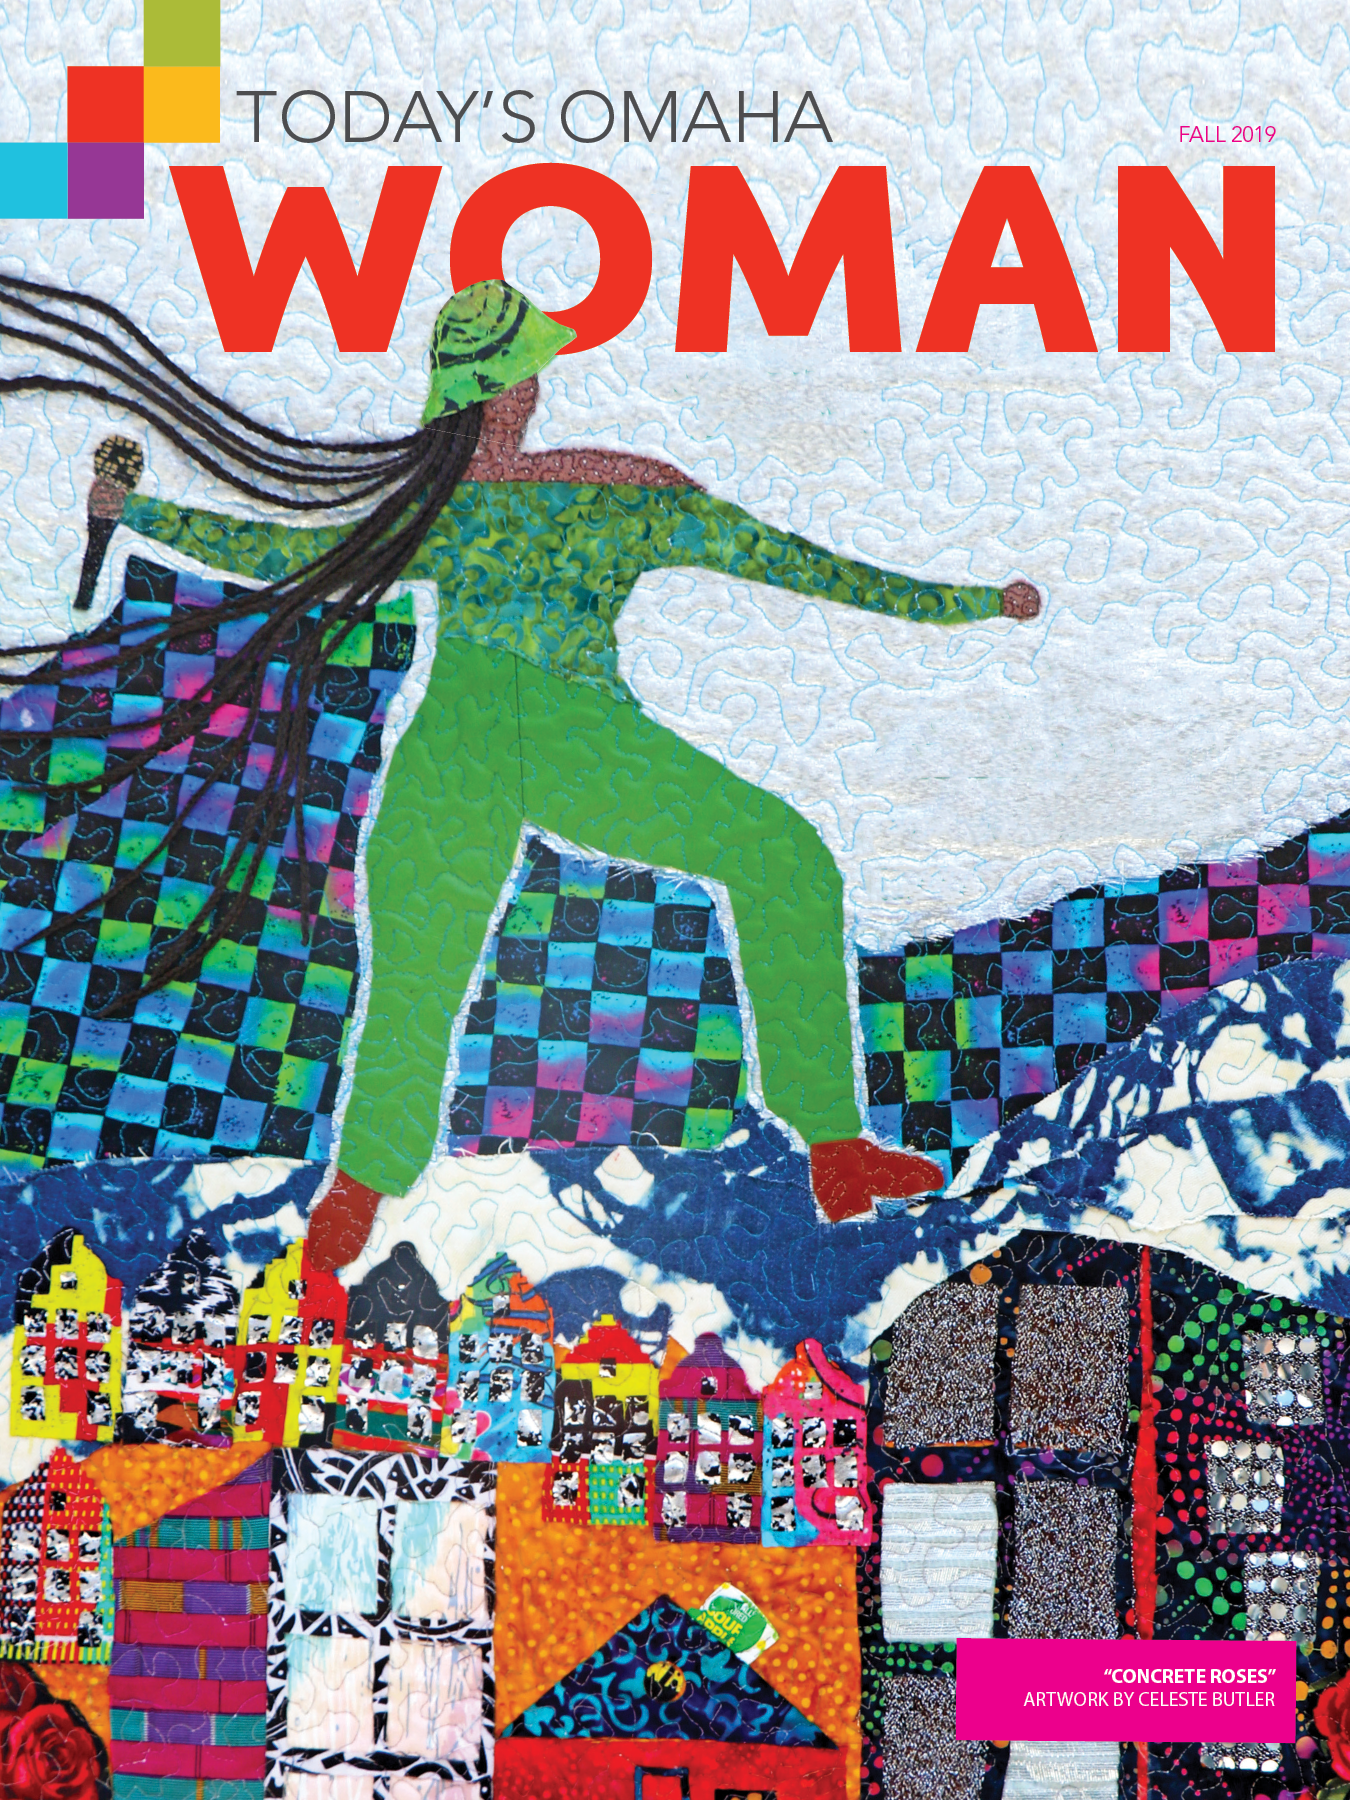 Cover image of Today's Omaha Woman magazine by Celeste Butler.